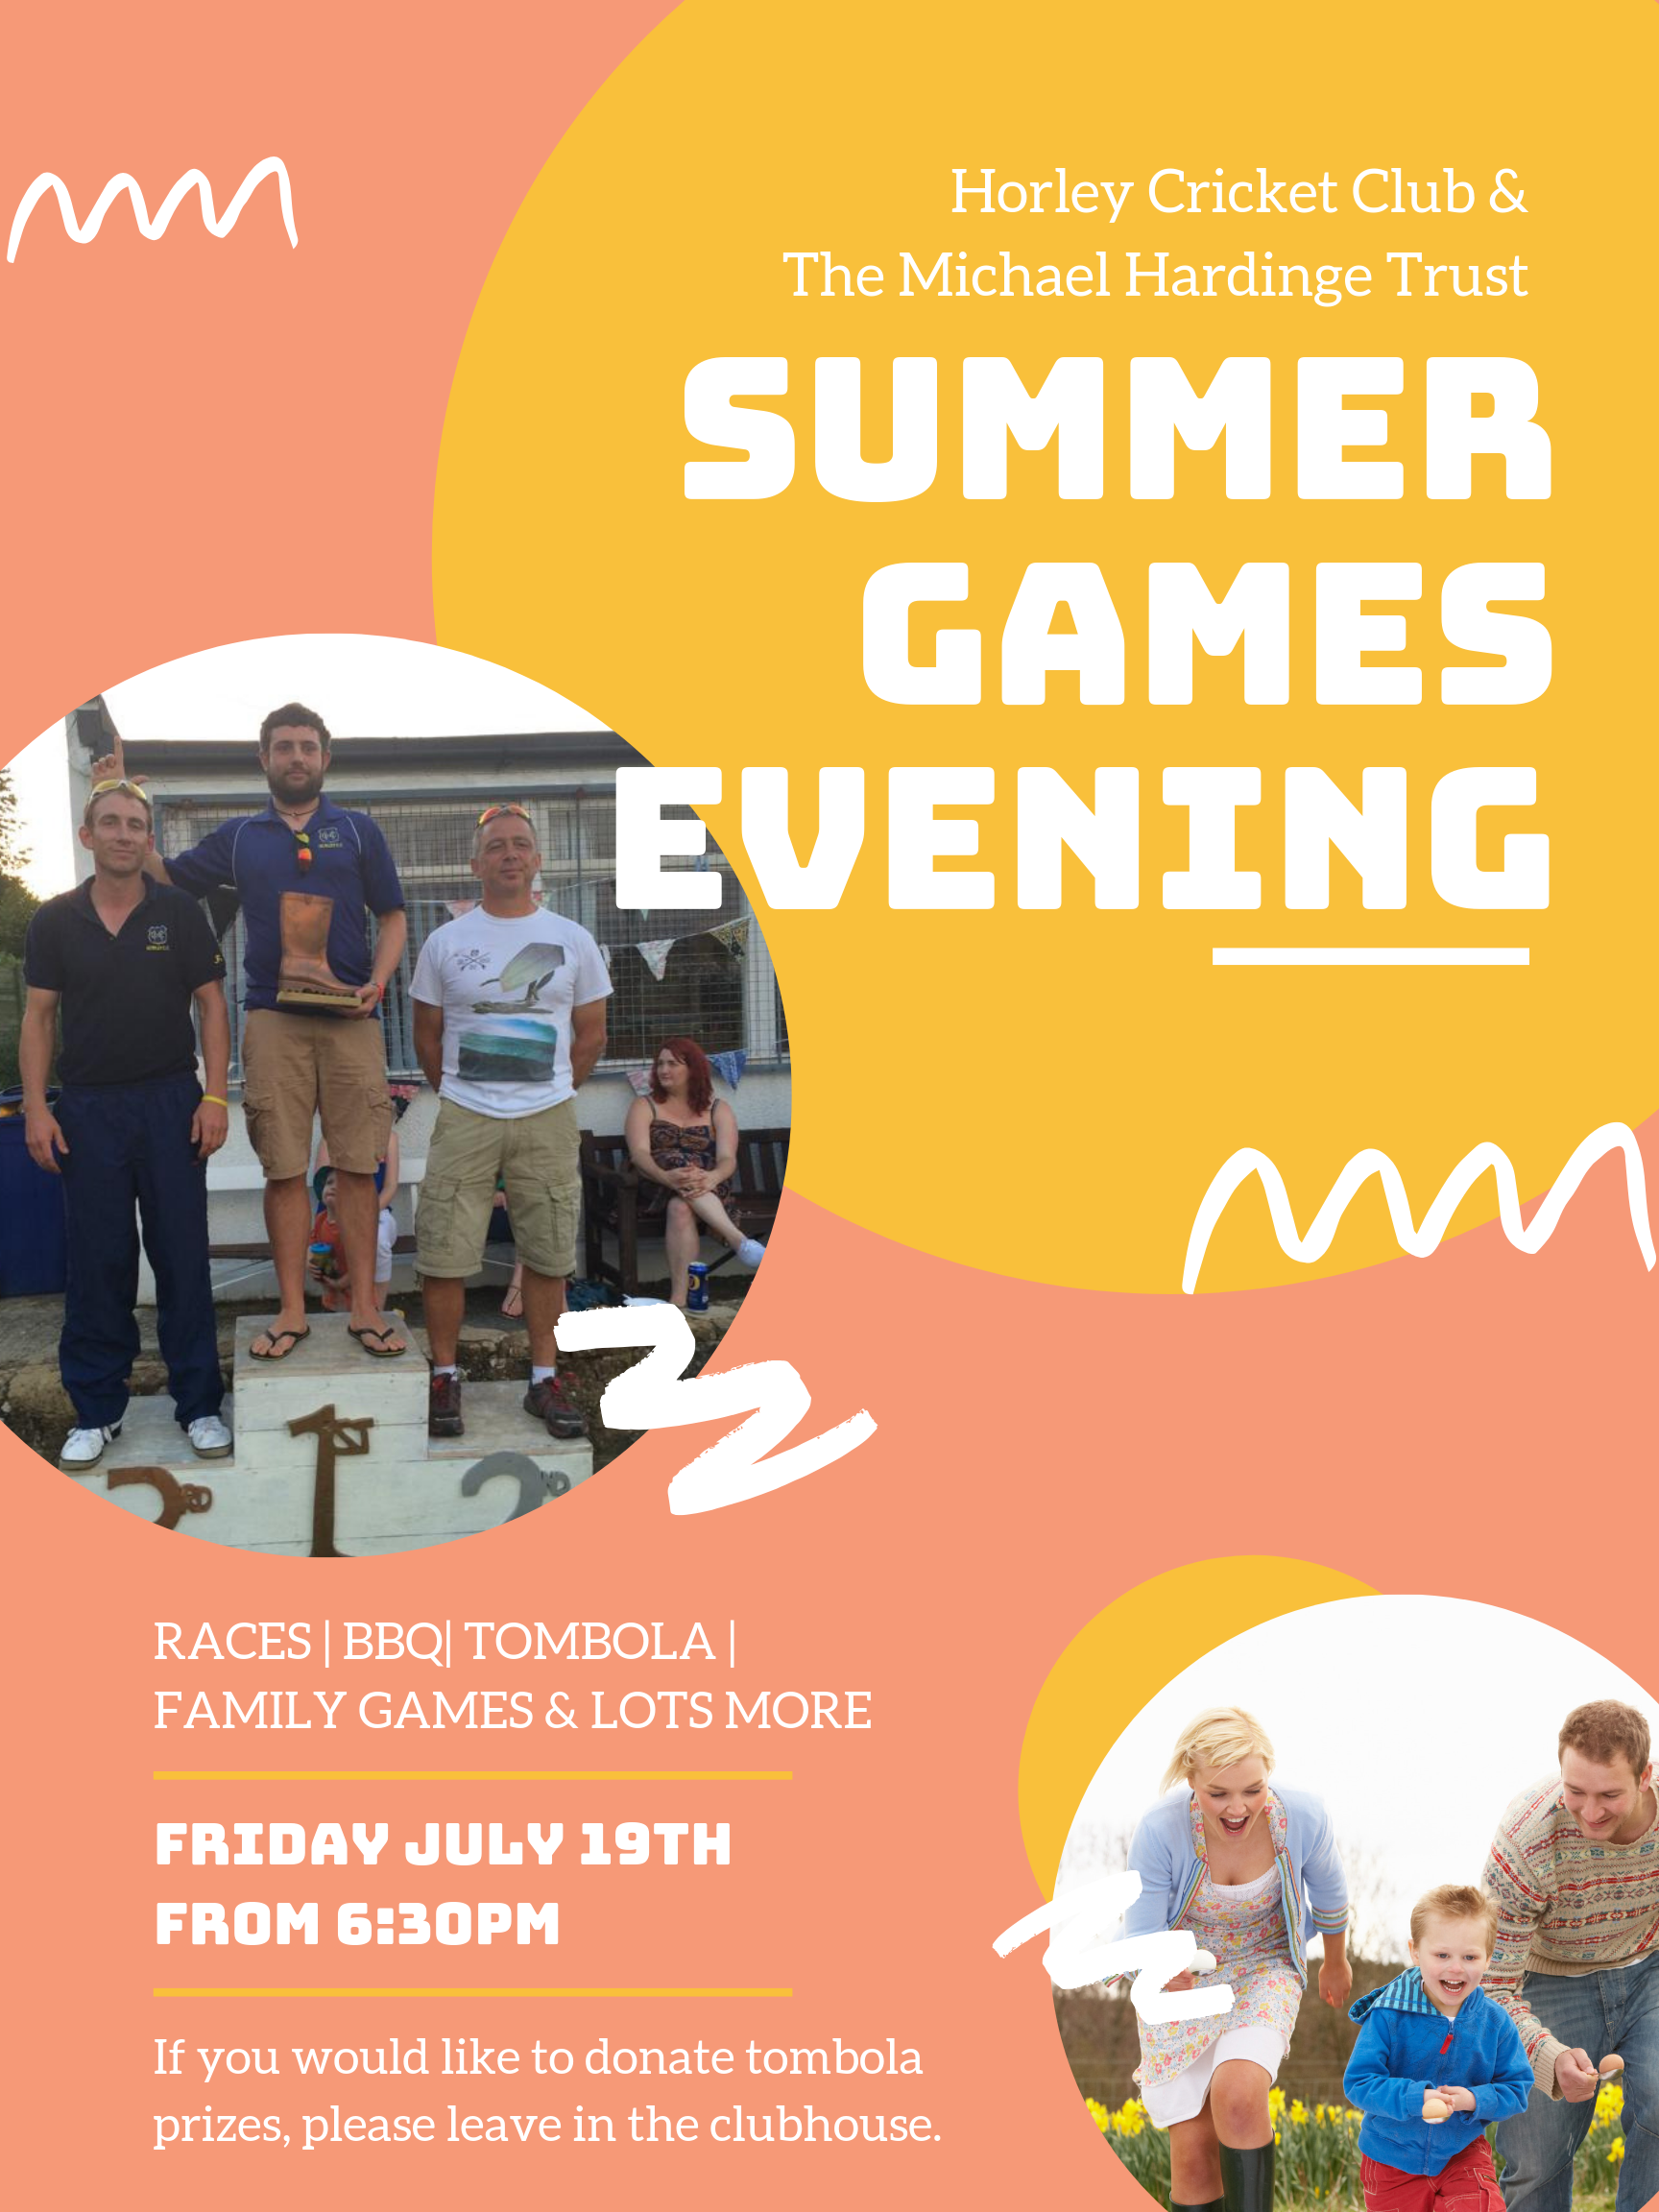 Summer Games Evening now Sunday 21st July 2pm